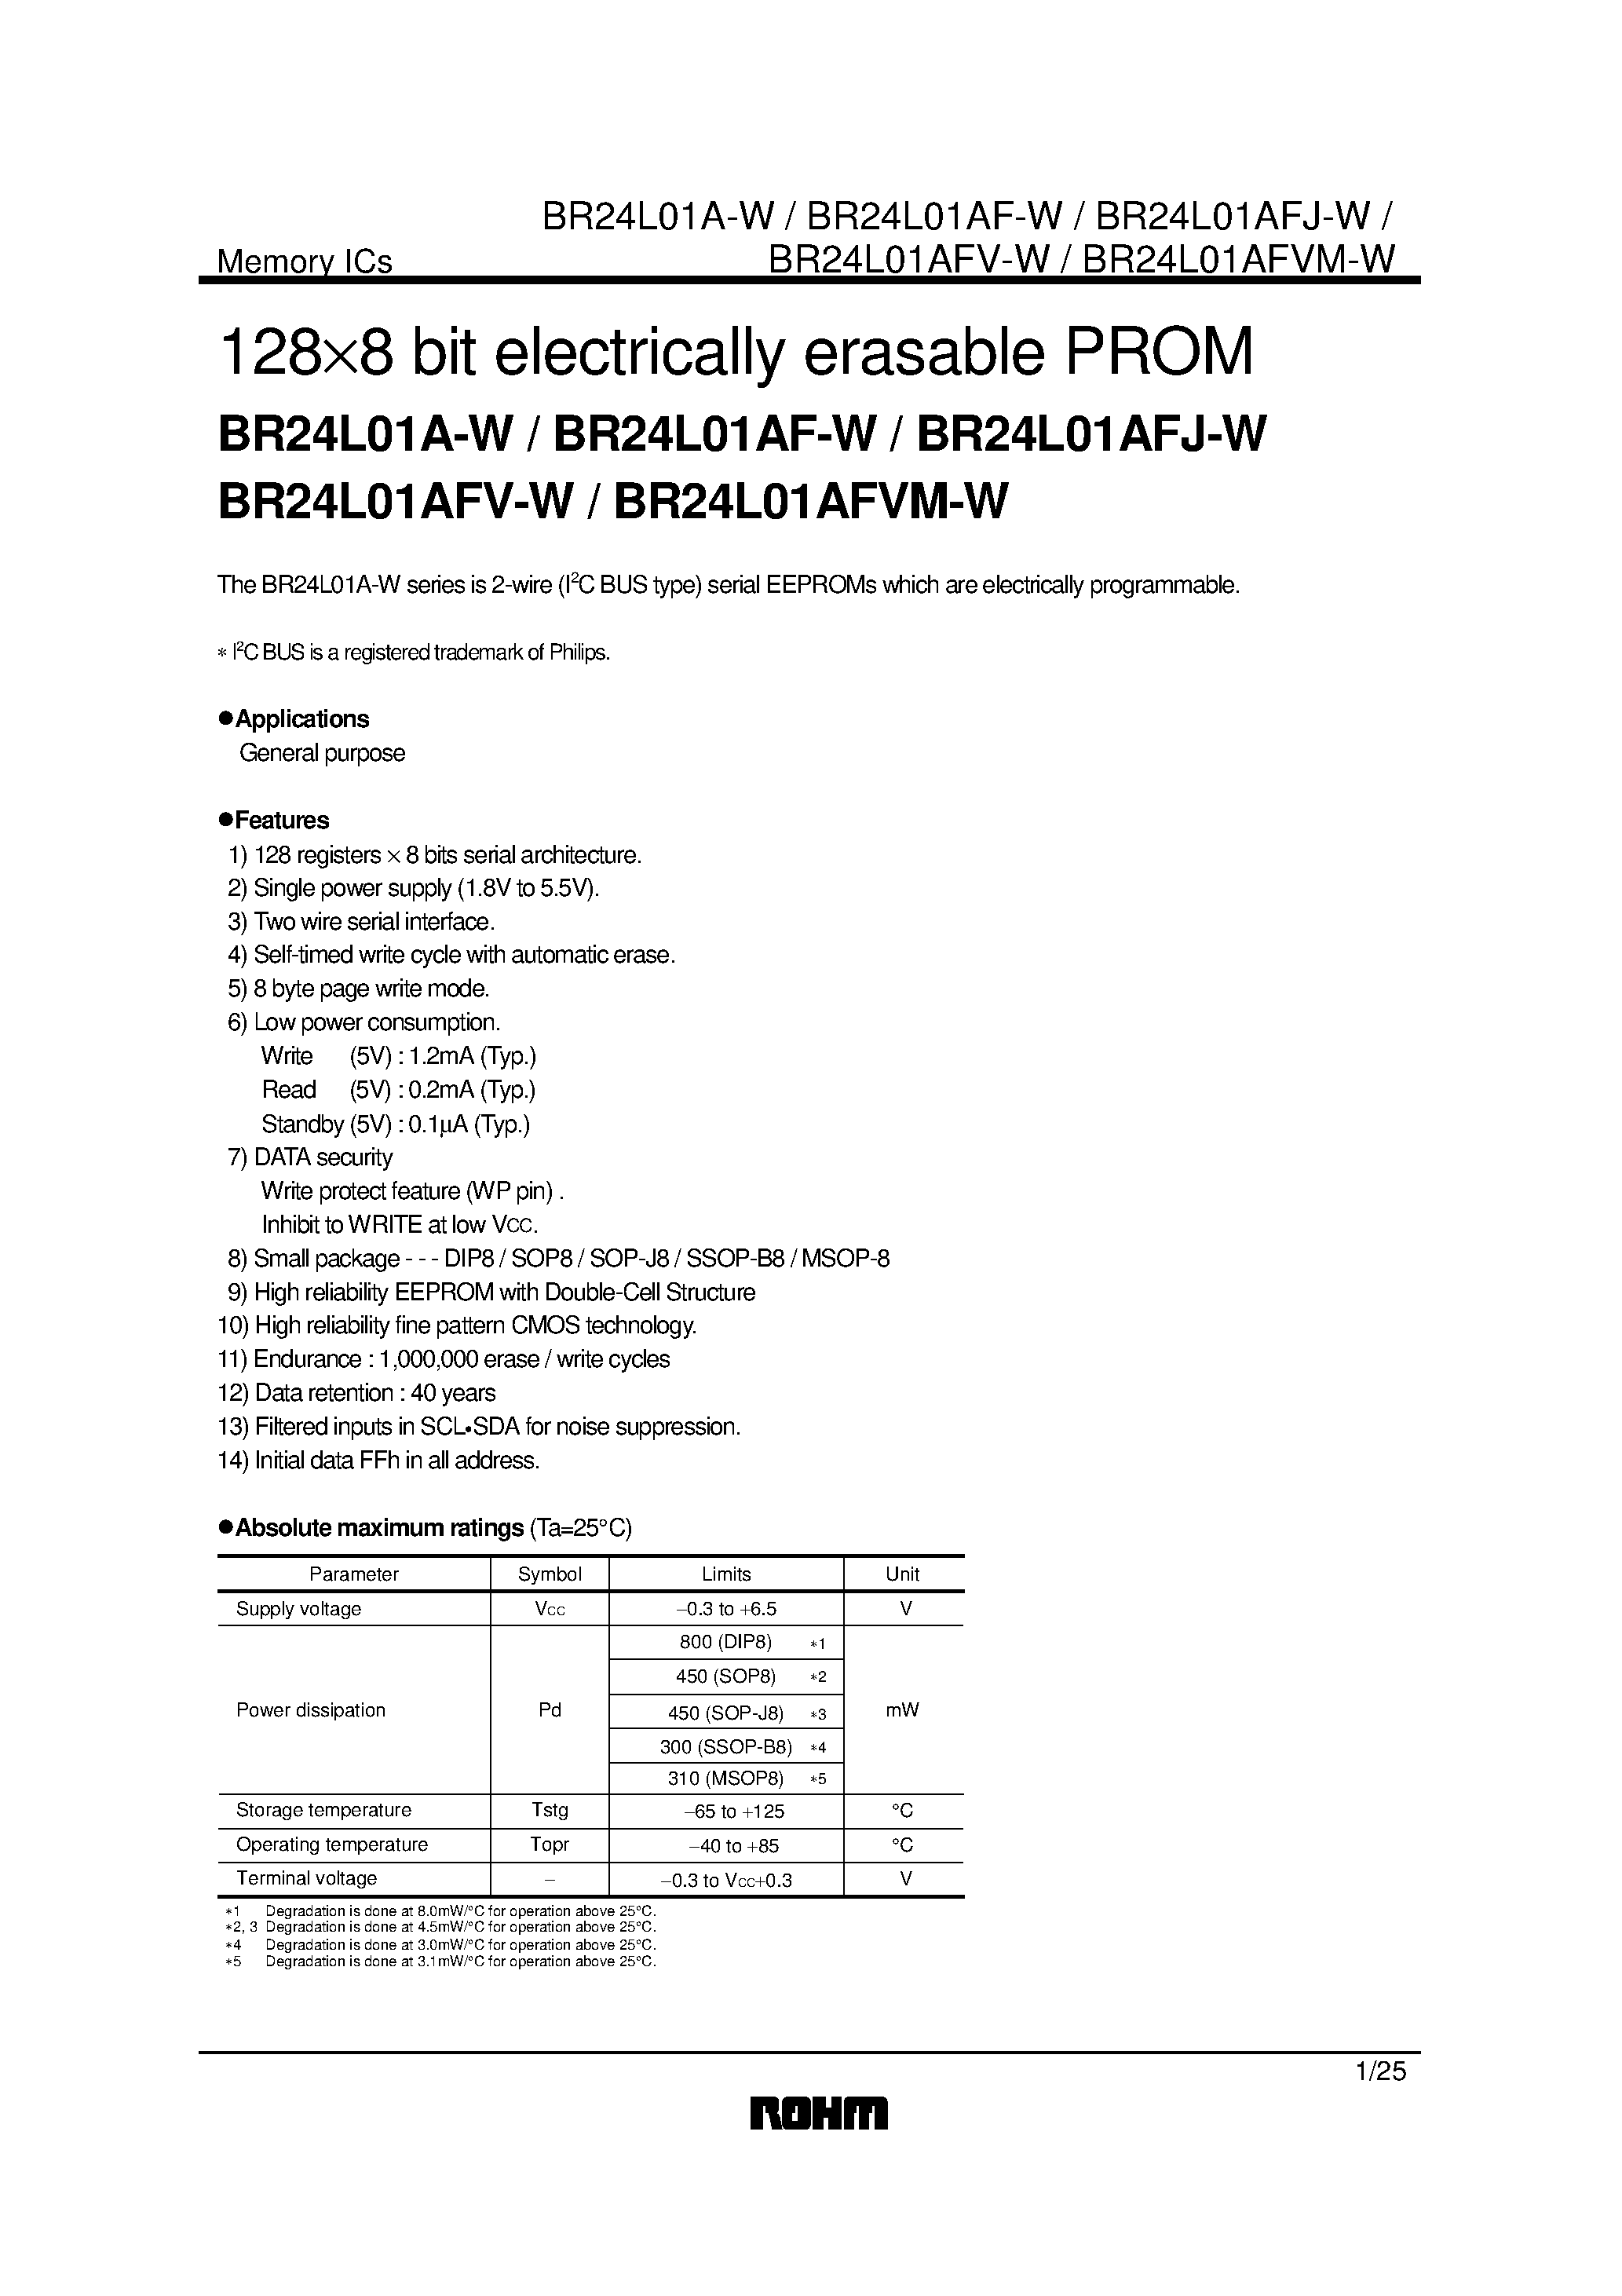 Datasheet BR24L01A-W - 1288 bit electrically erasable PROM page 1